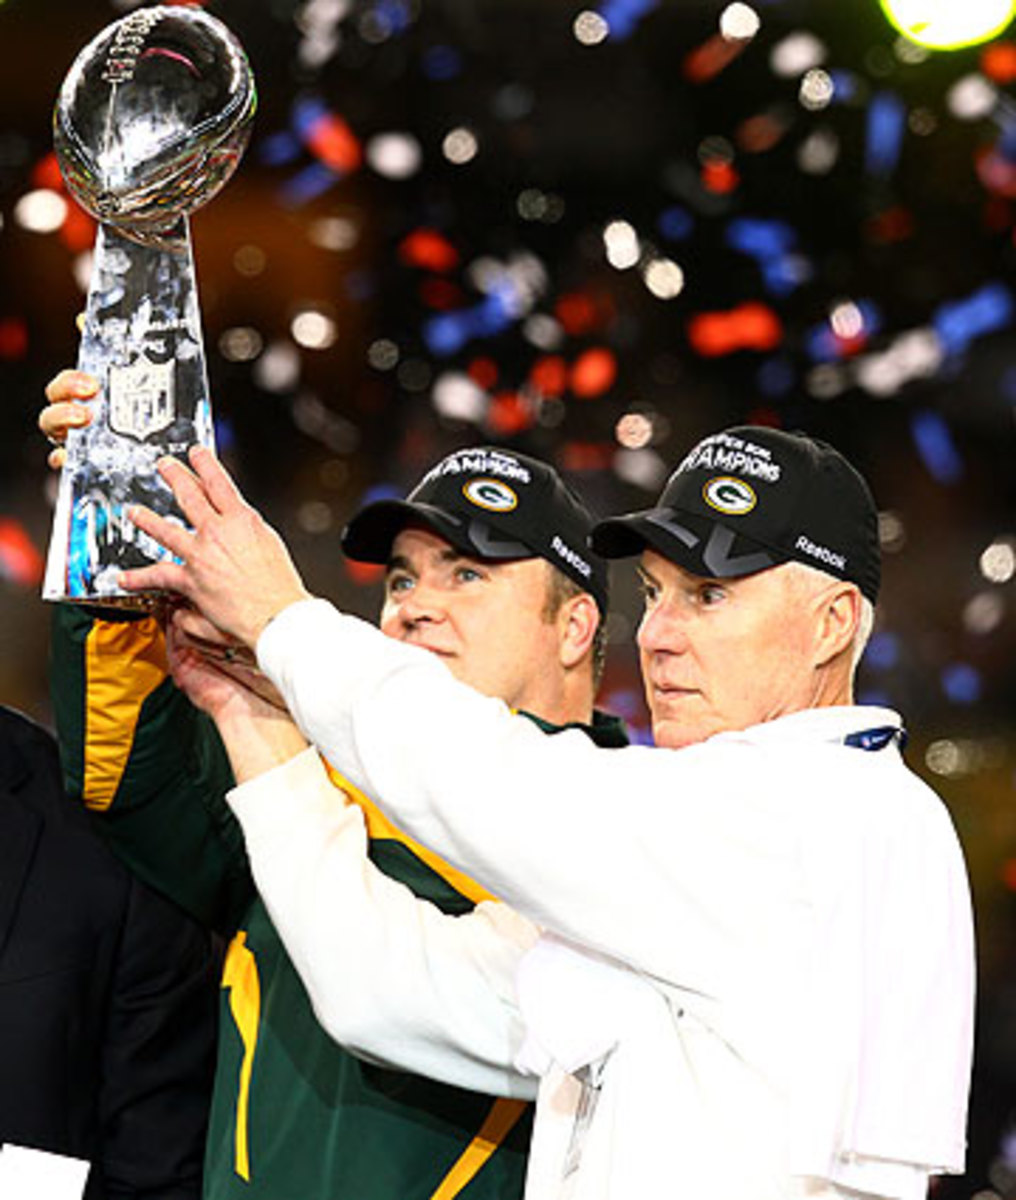 Thompson and Mike McCarthy lifted the Lombardi following the 2010 season. (Kevin Terrell/AP)